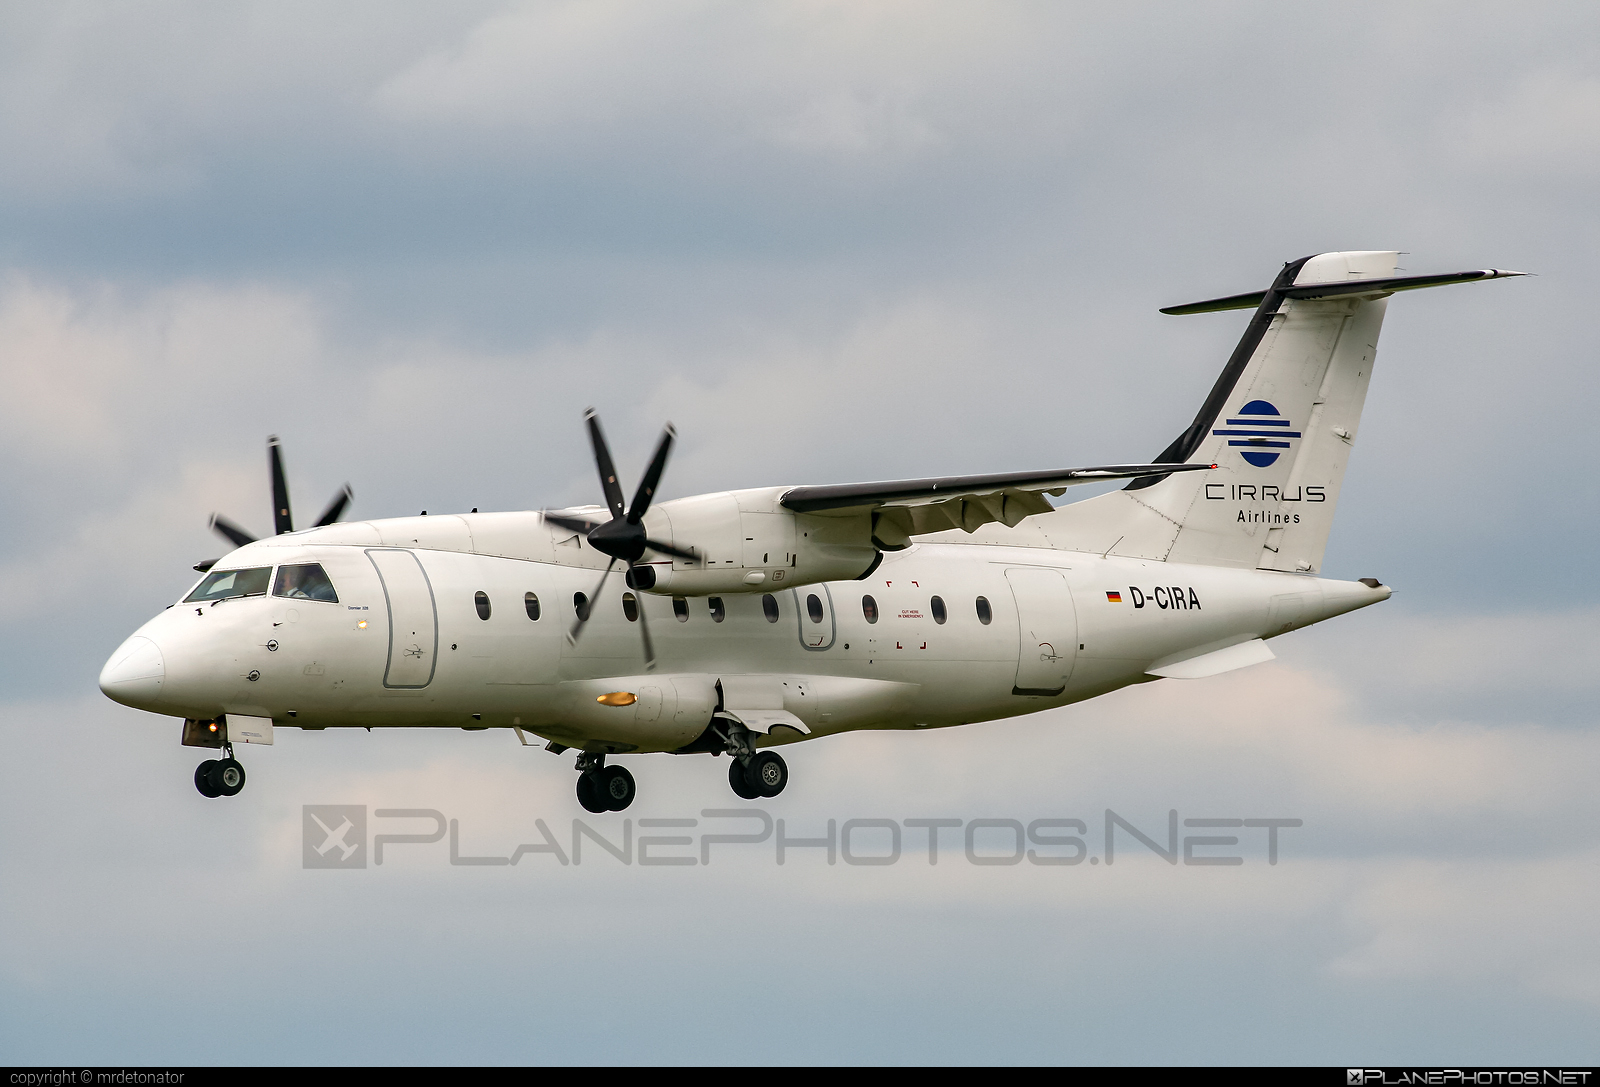 Dornier 328-120 - D-CIRA operated by Cirrus Airlines #CirrusAirlines #Dornier328-120 #dornier